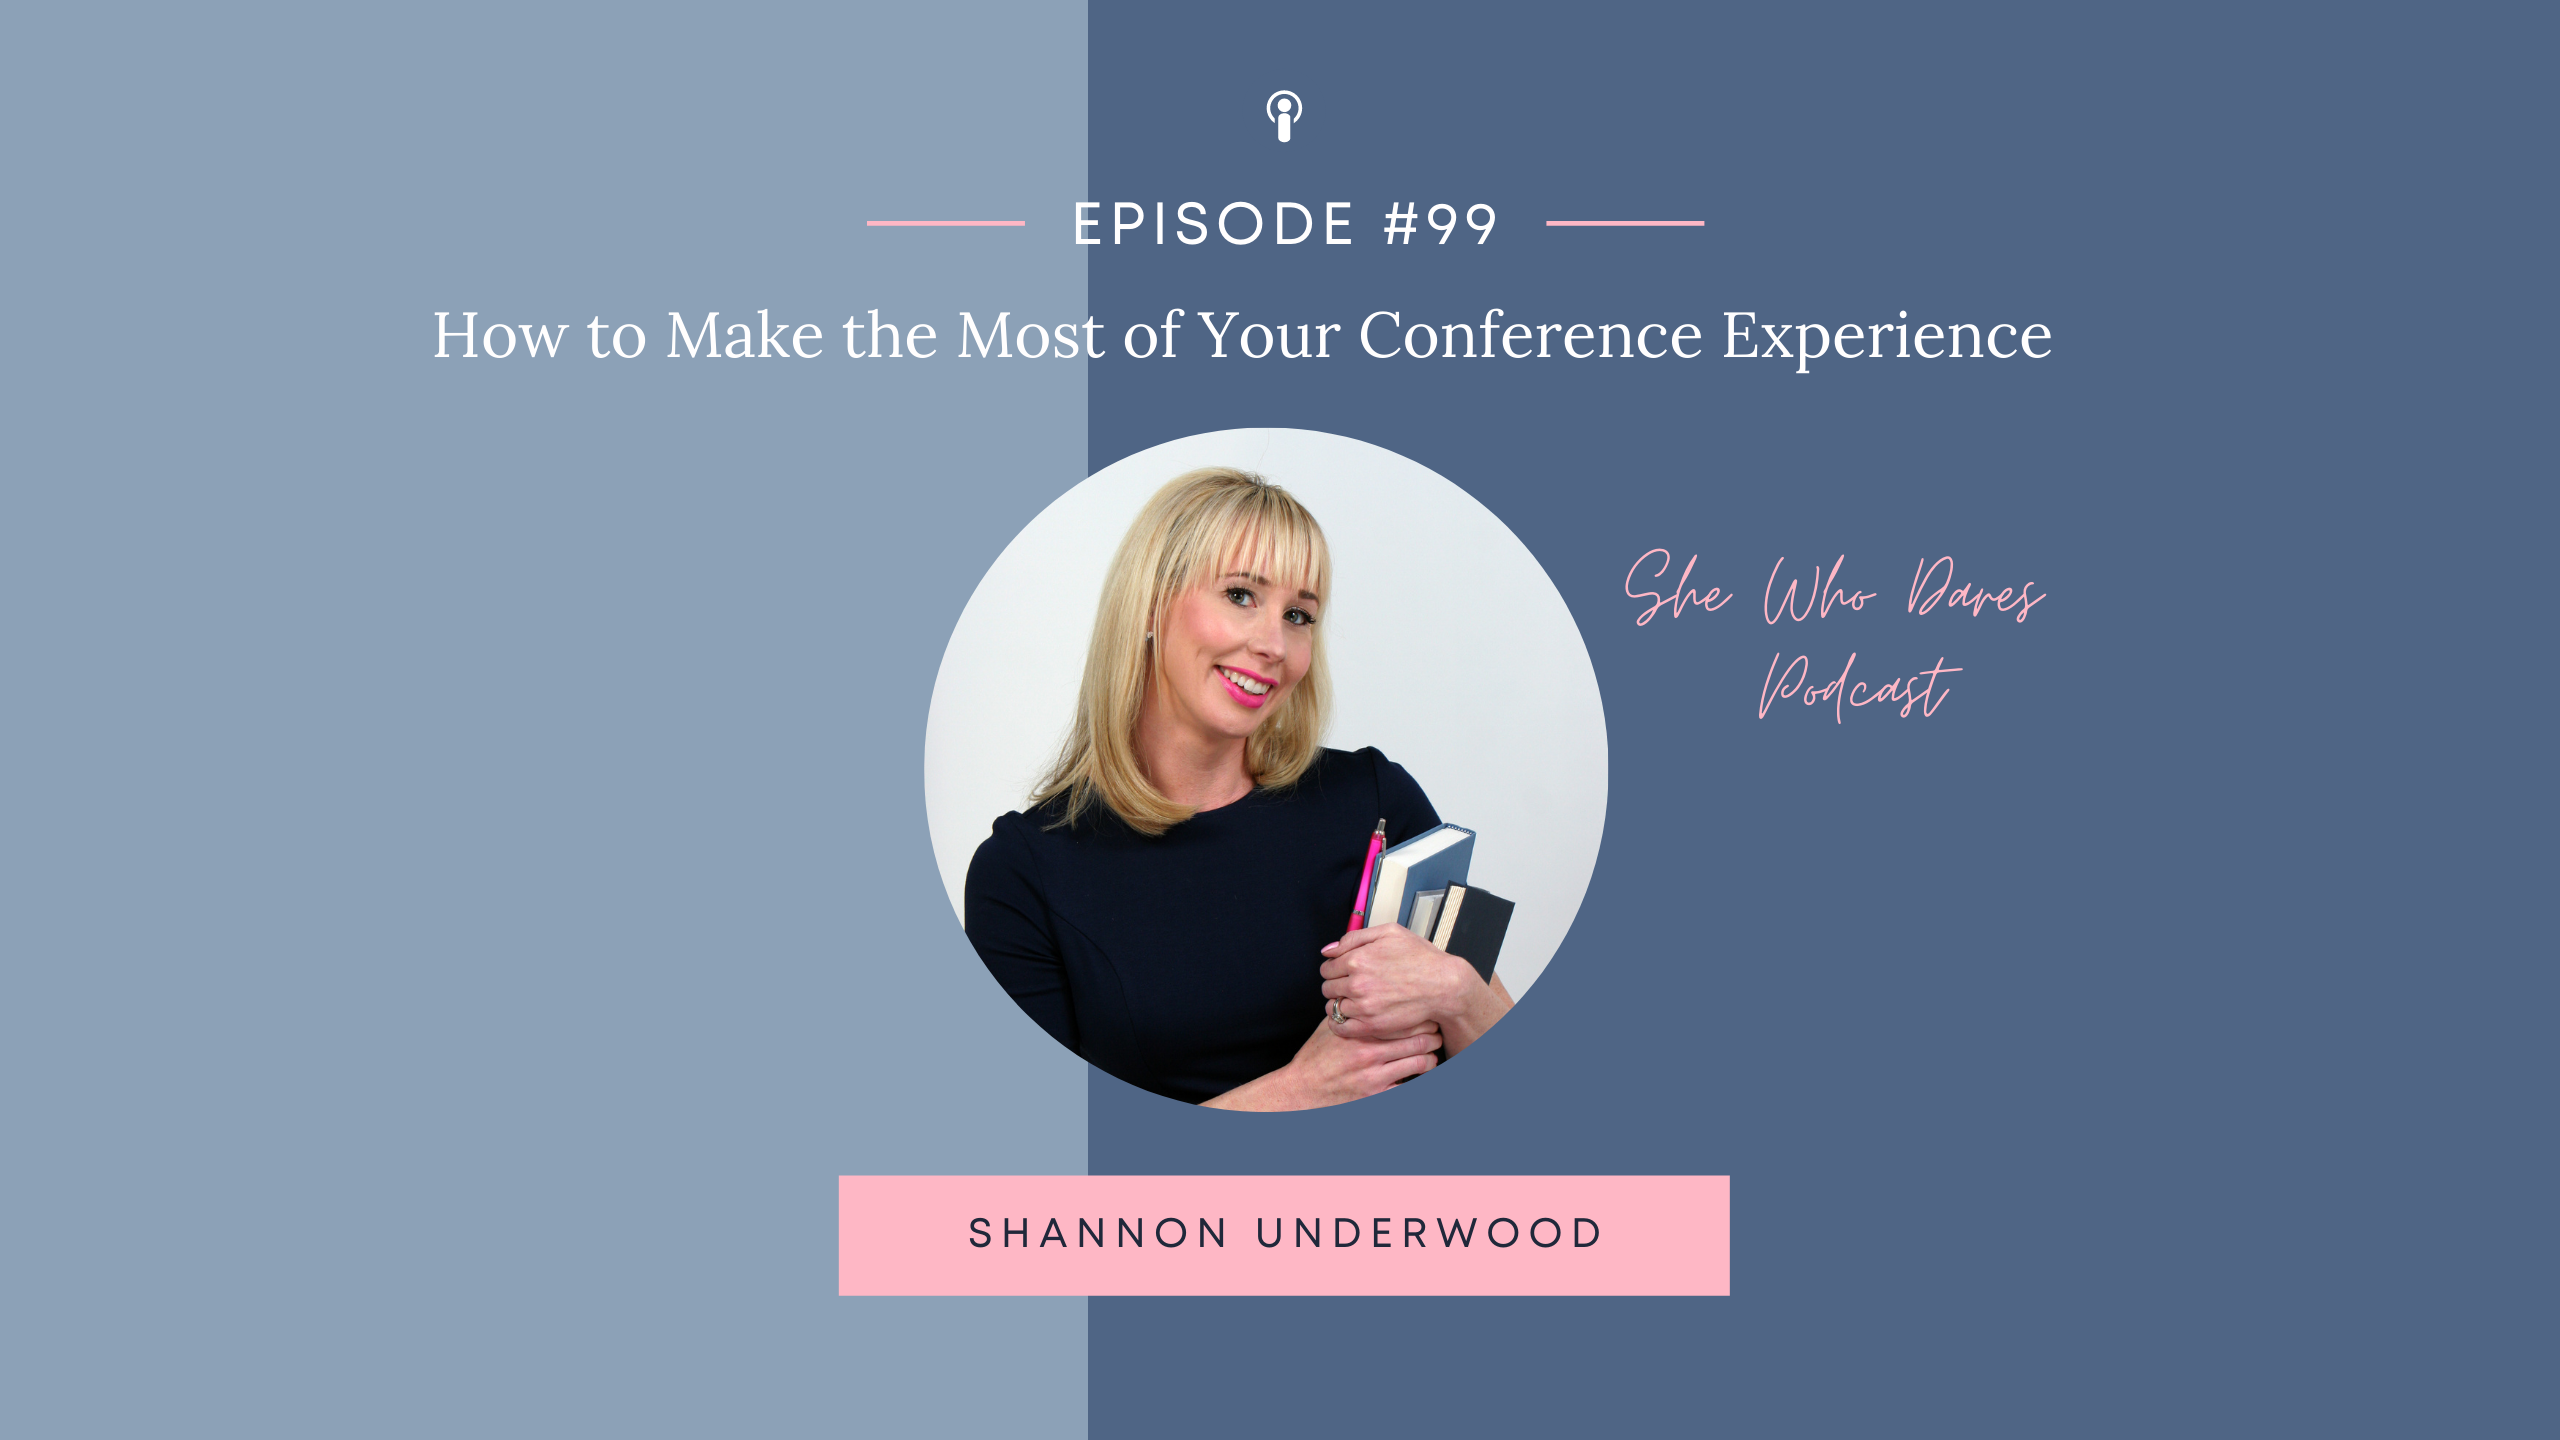 How to Make the Most of Your Conference Experience